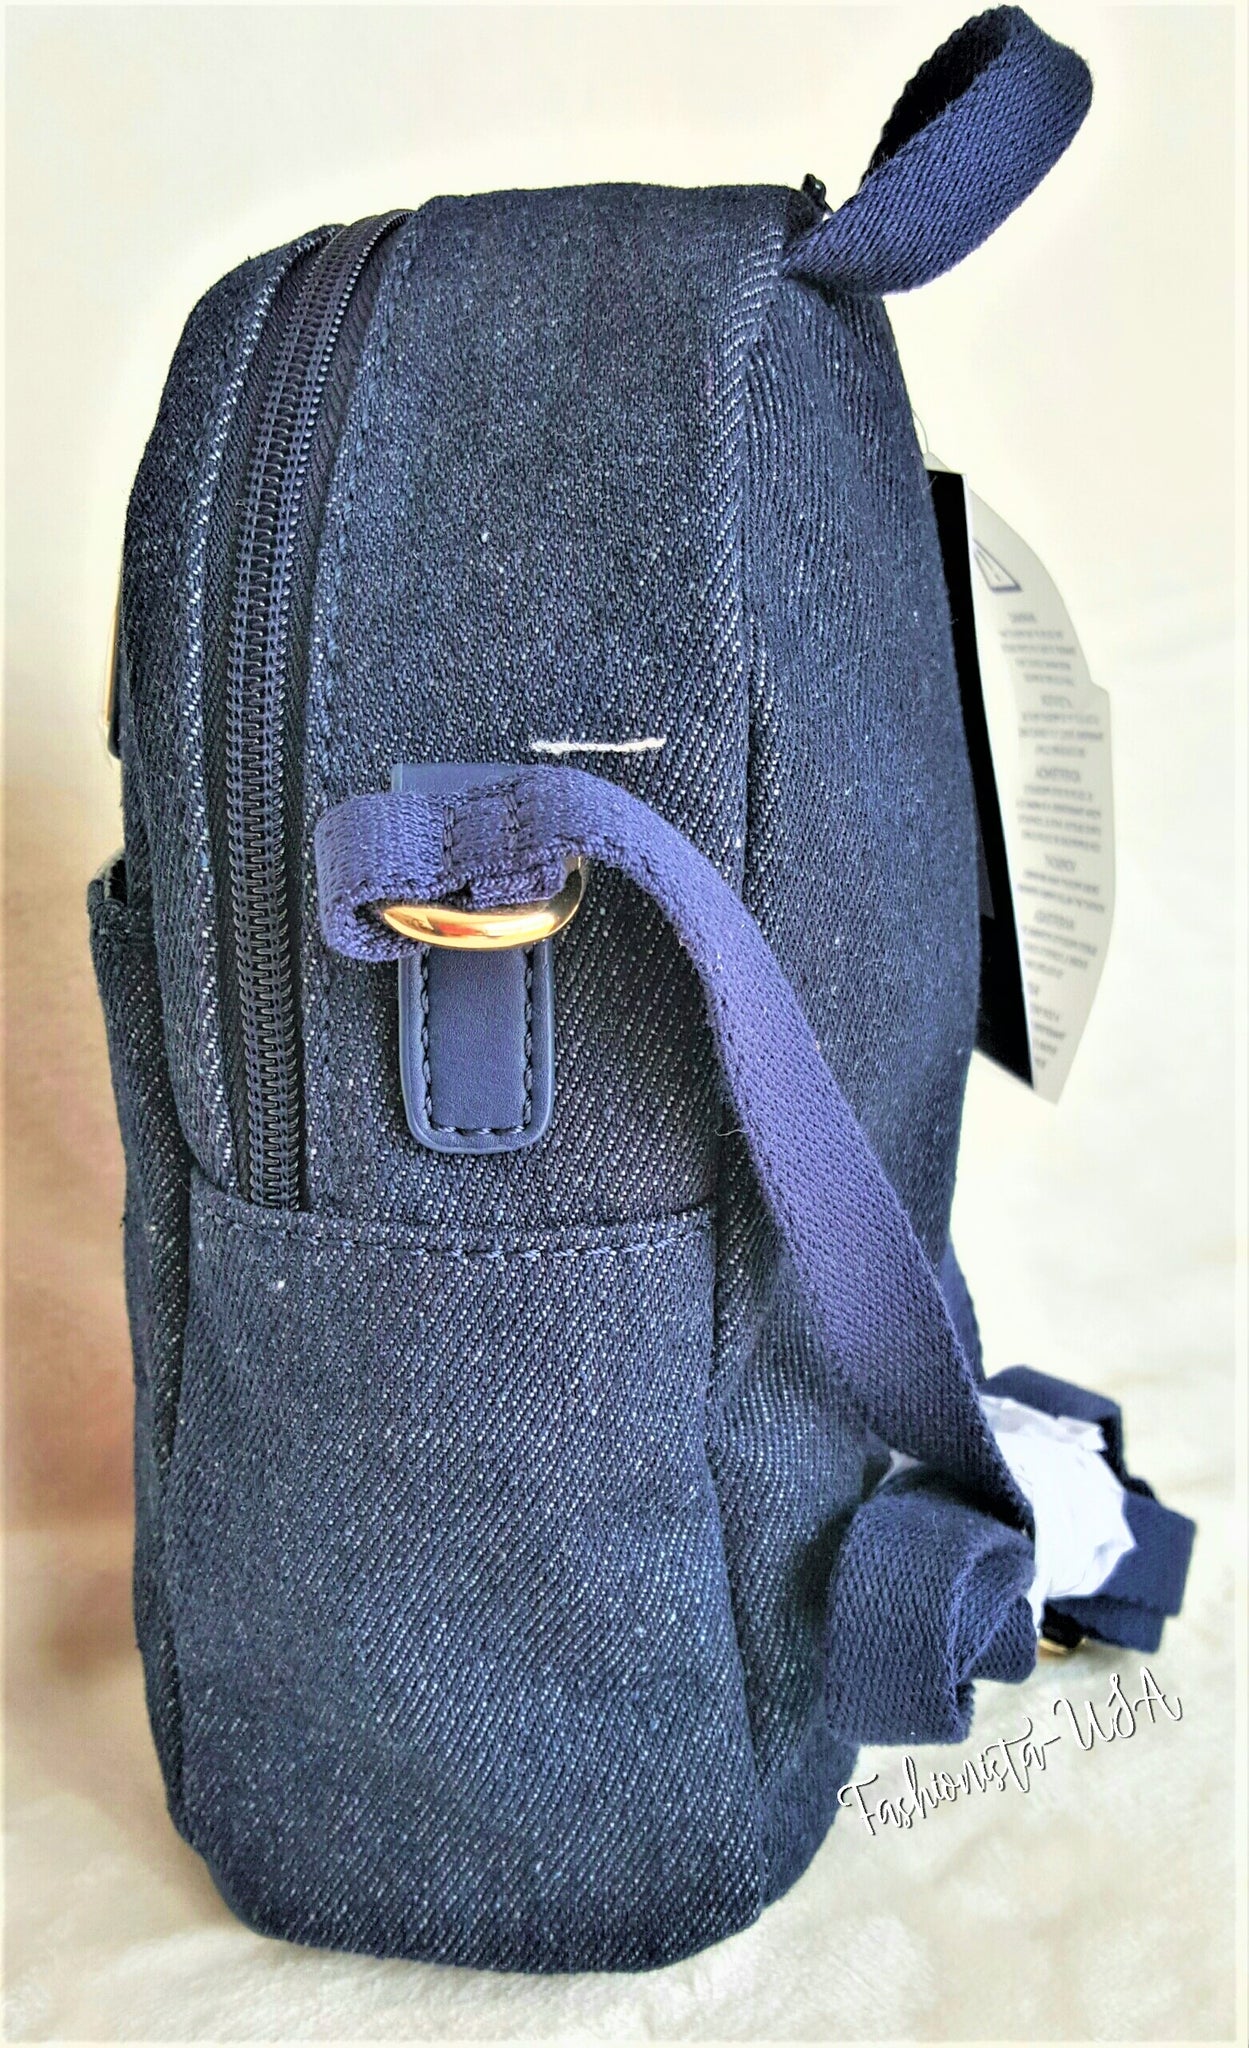 Backpack TOMMY JEANS Travel Backpack AM0AM08565 0GY